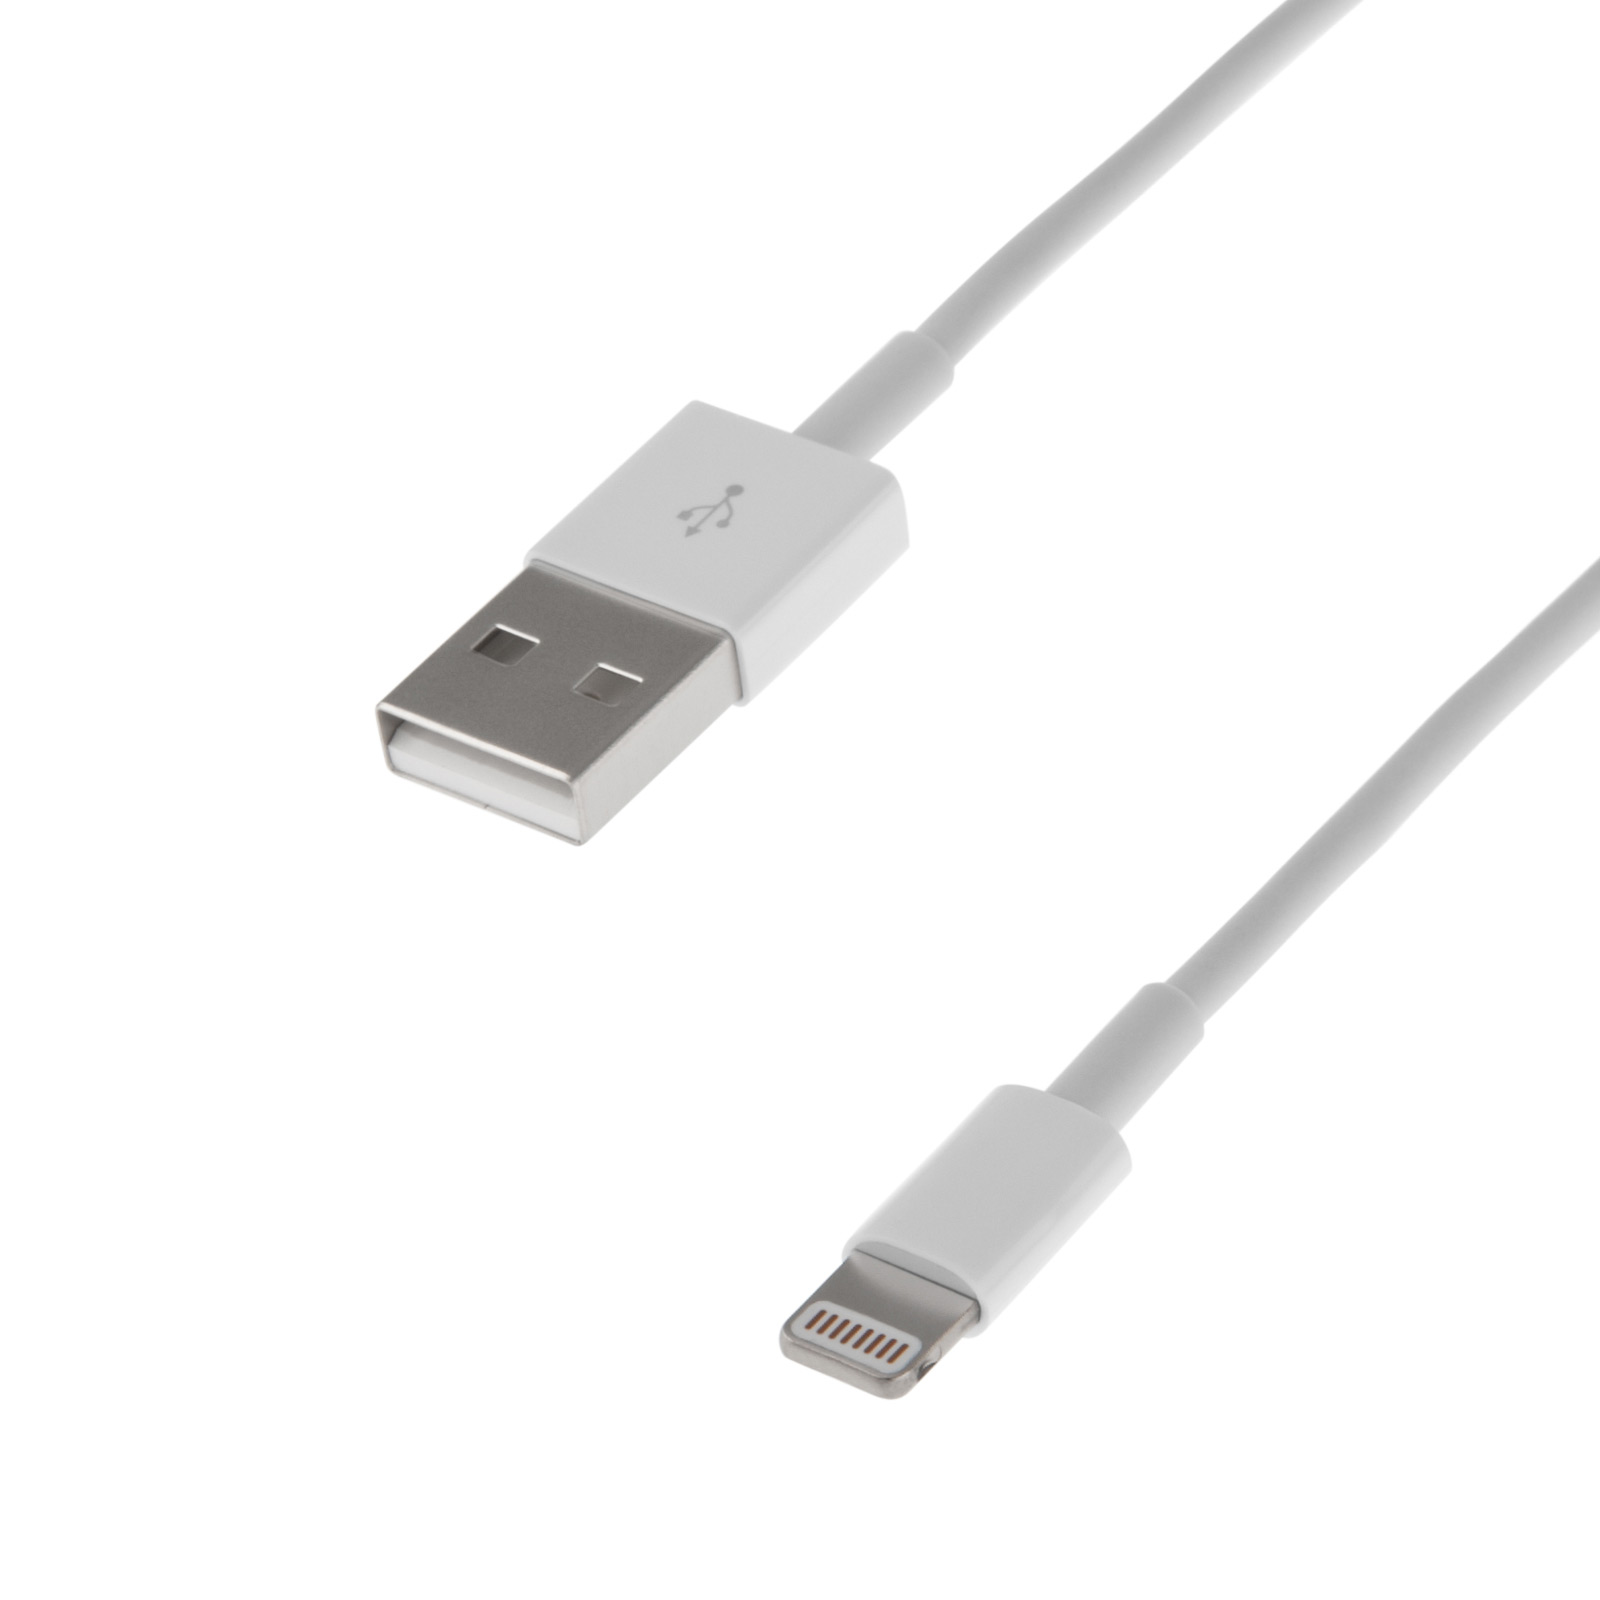 Official Apple Lightning to USB Cable (1 metre) for iPhone 6 Plus and 6s Plus /6s, 6 Plus /6s Plus And iPhone 5,5C & 5S